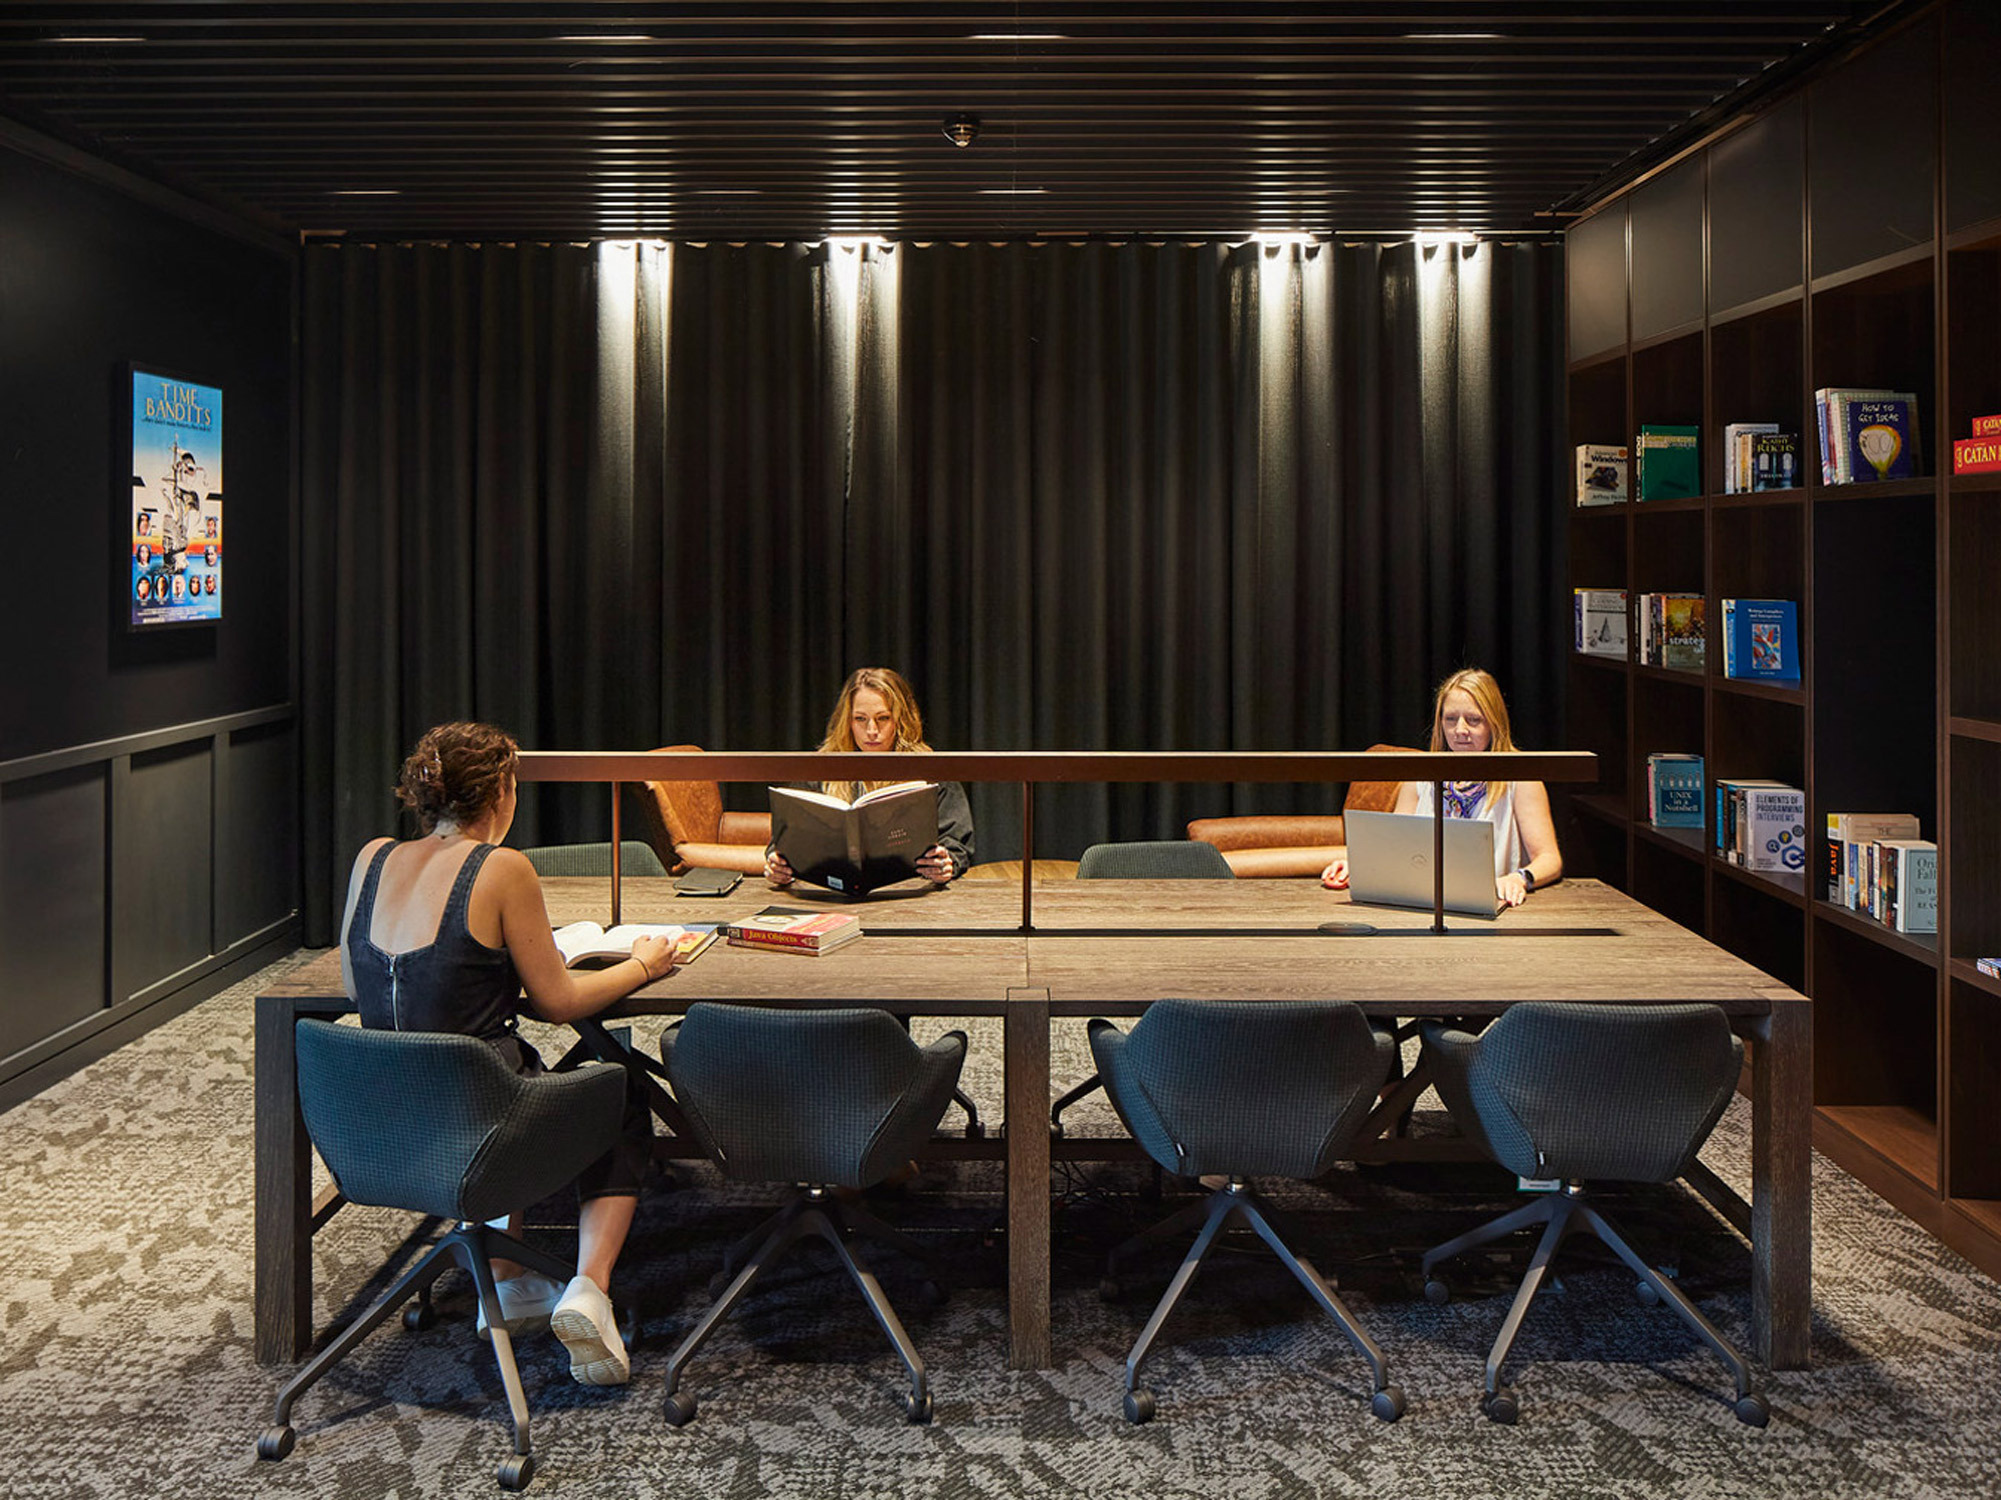 Modern corporate library space with individuals at a large shared wooden table, surrounded by dark shelving filled with books and accent lighting, creating an inviting atmosphere for collaboration or quiet study.